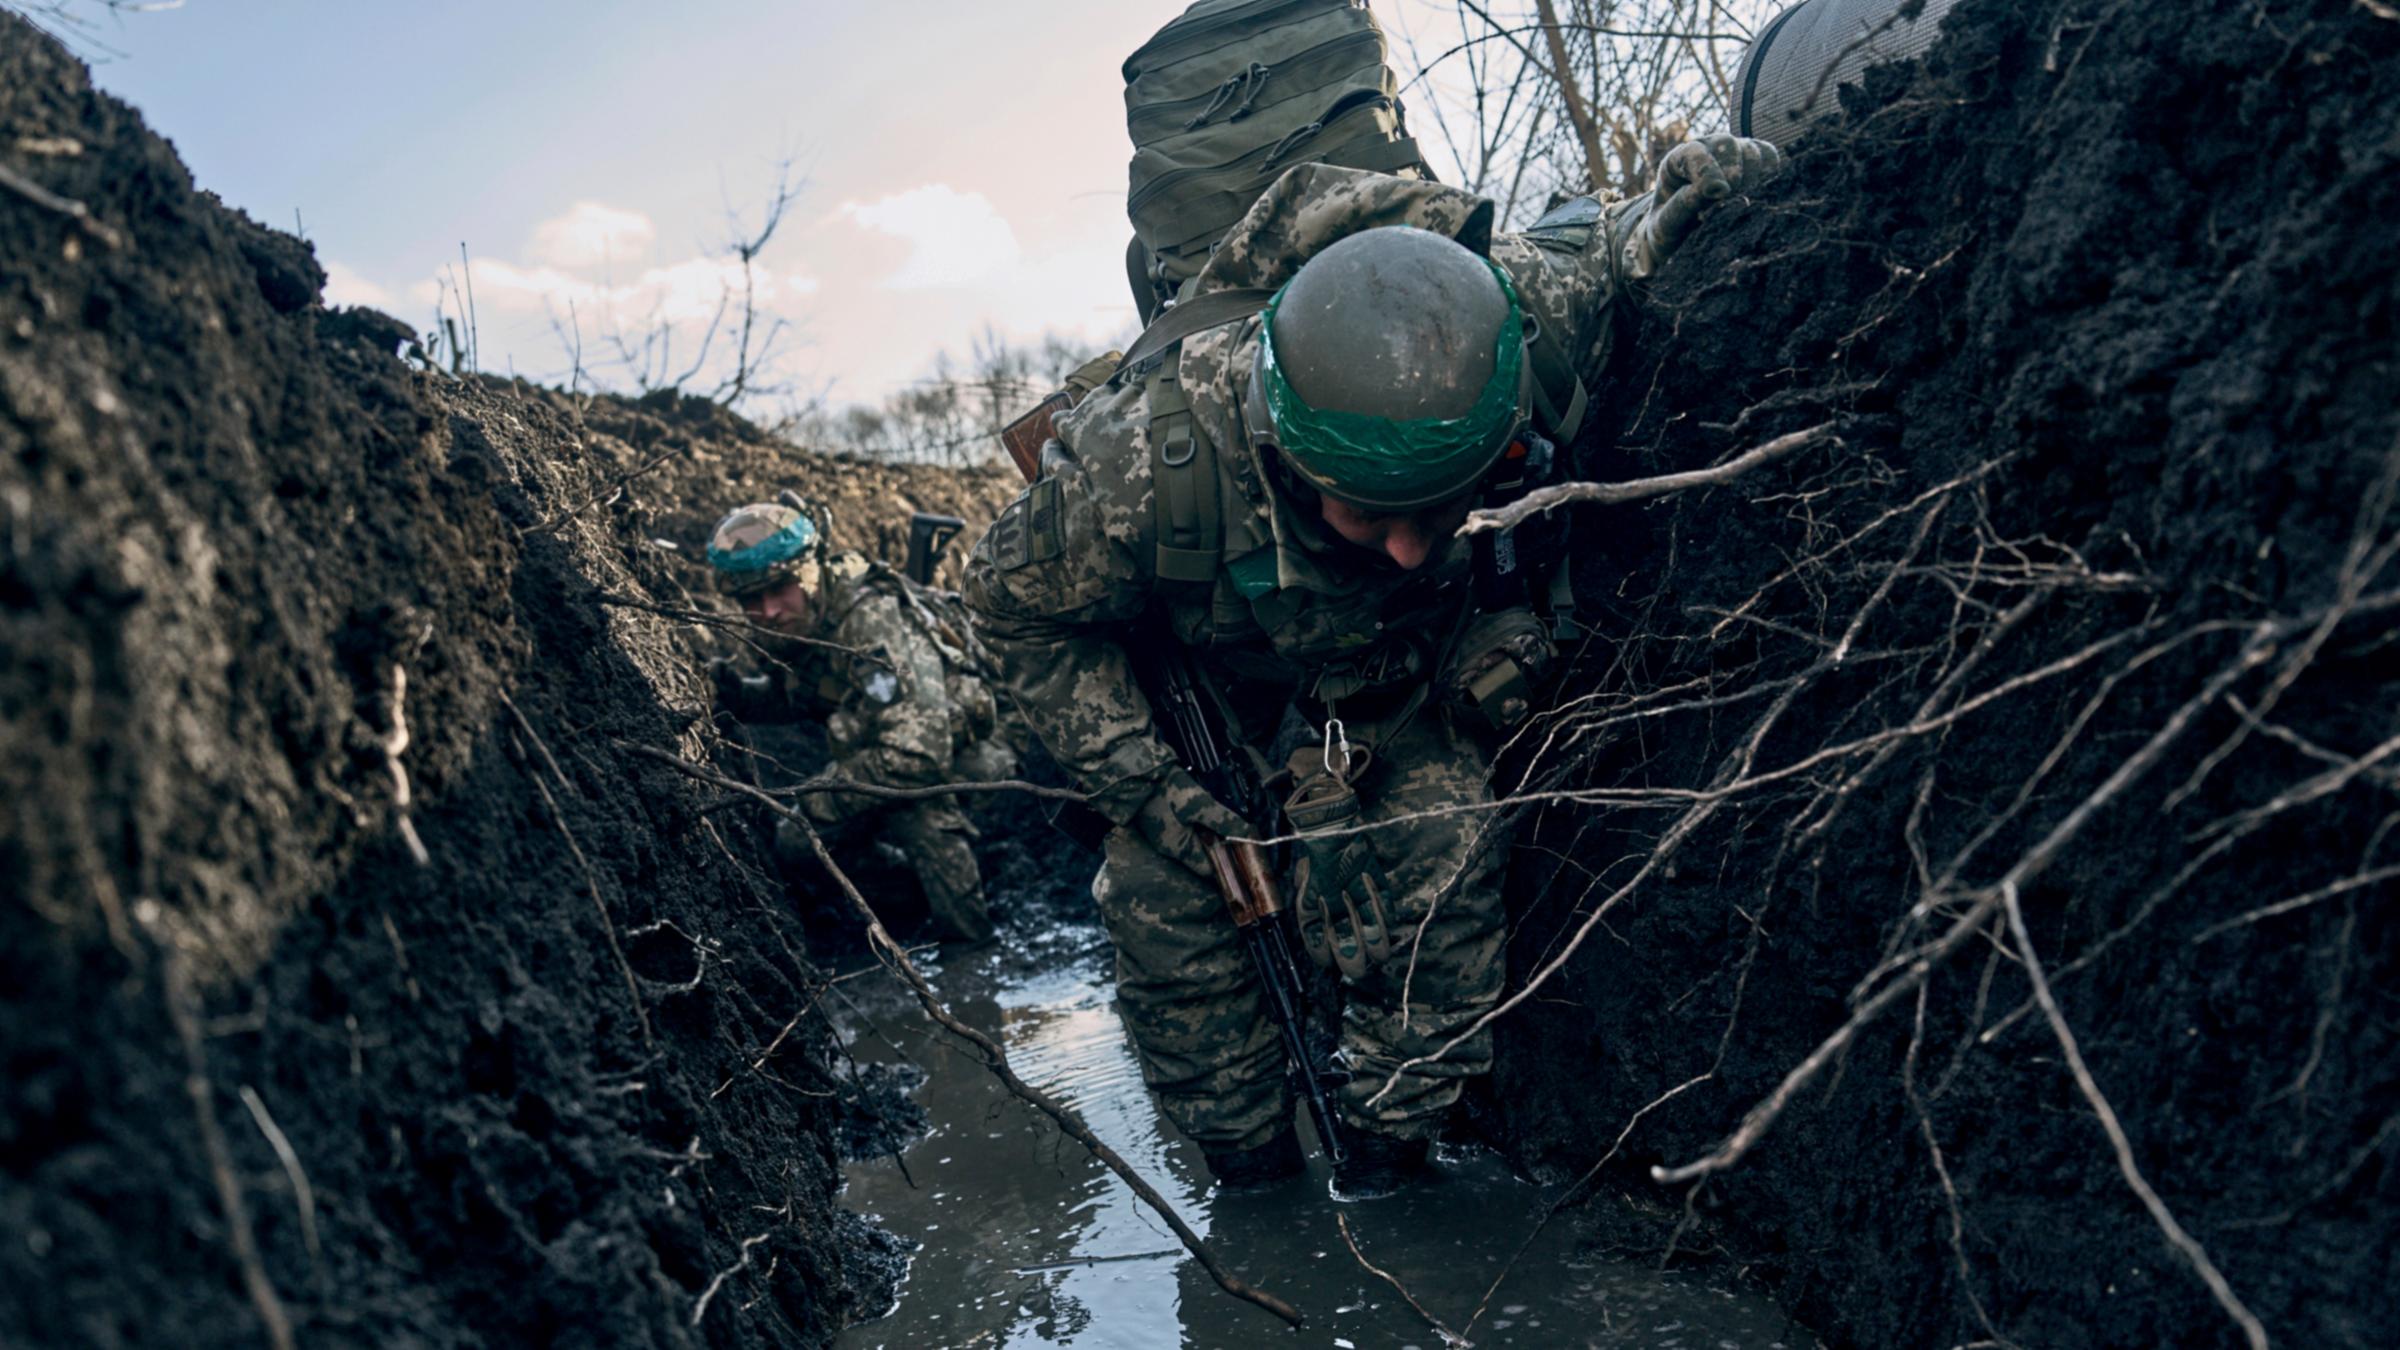 Ukrainian soldiers in the trenches under Russian fire